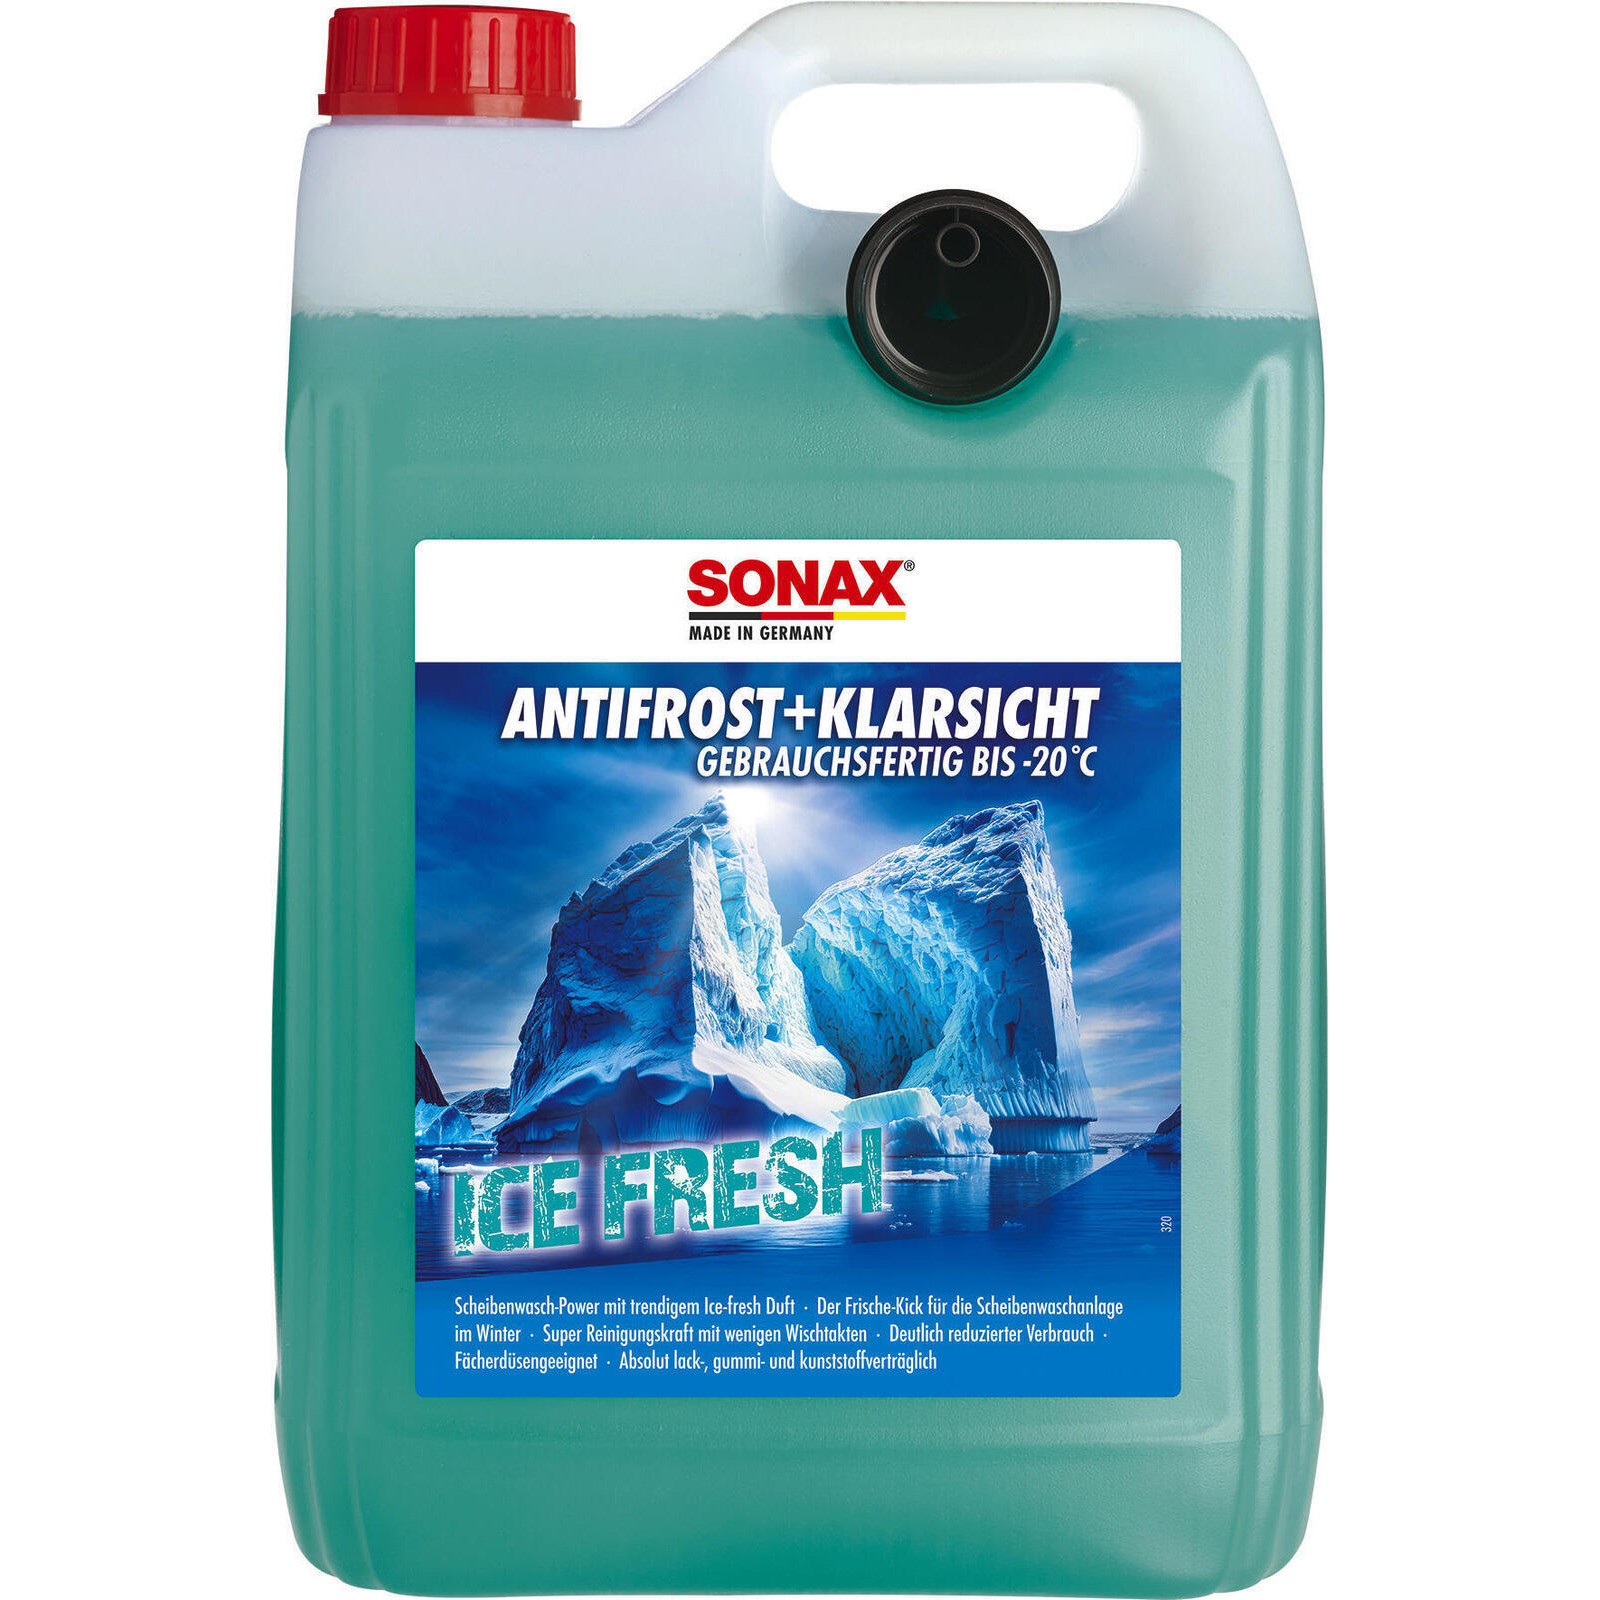 SONAX Antifreeze, window cleaning system AntiFreeze + Clear View ready-to-use -20 C IceFresh